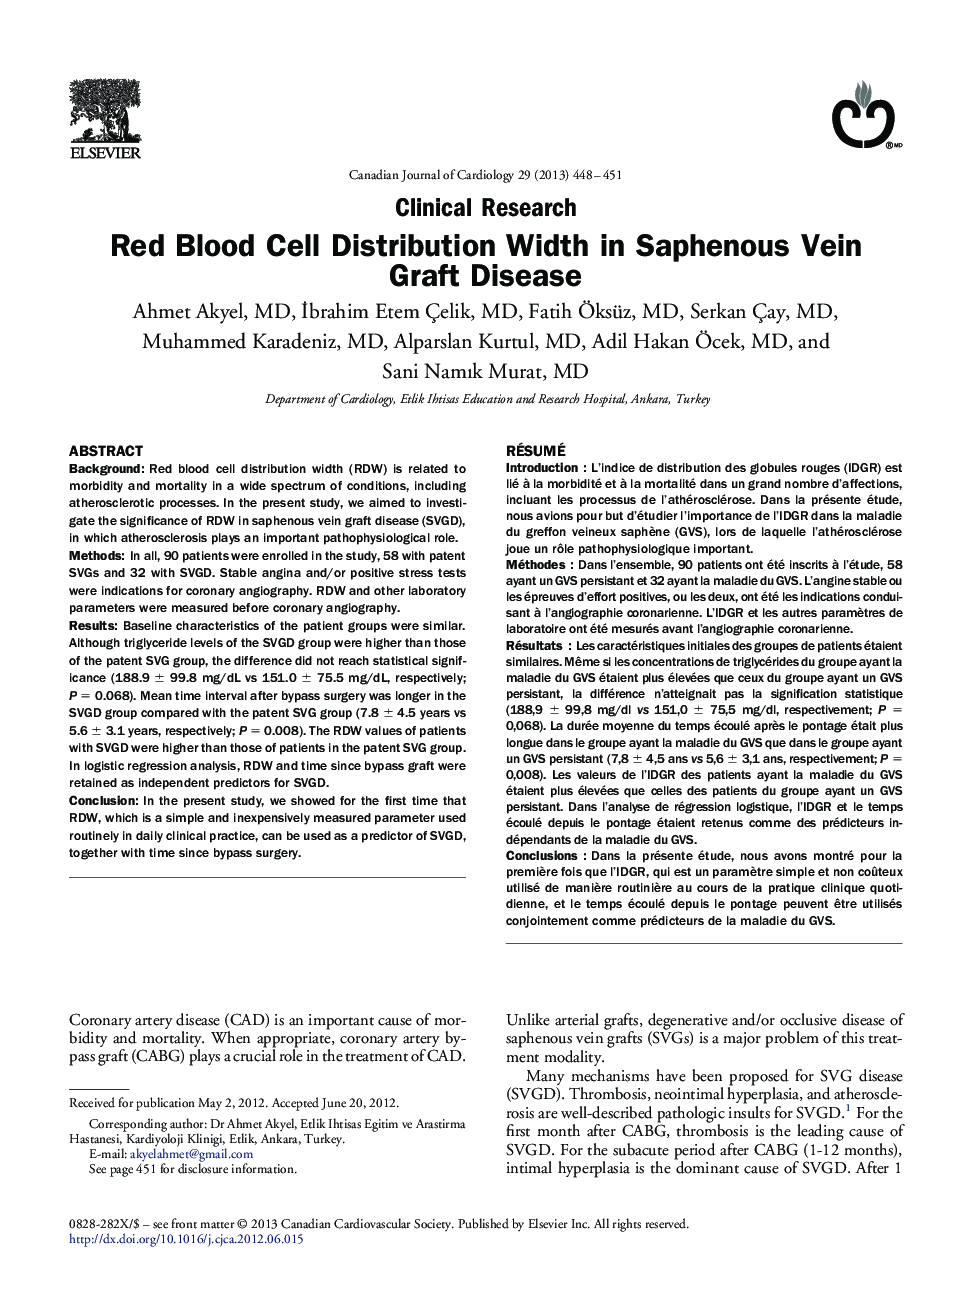 Red Blood Cell Distribution Width in Saphenous Vein Graft Disease 